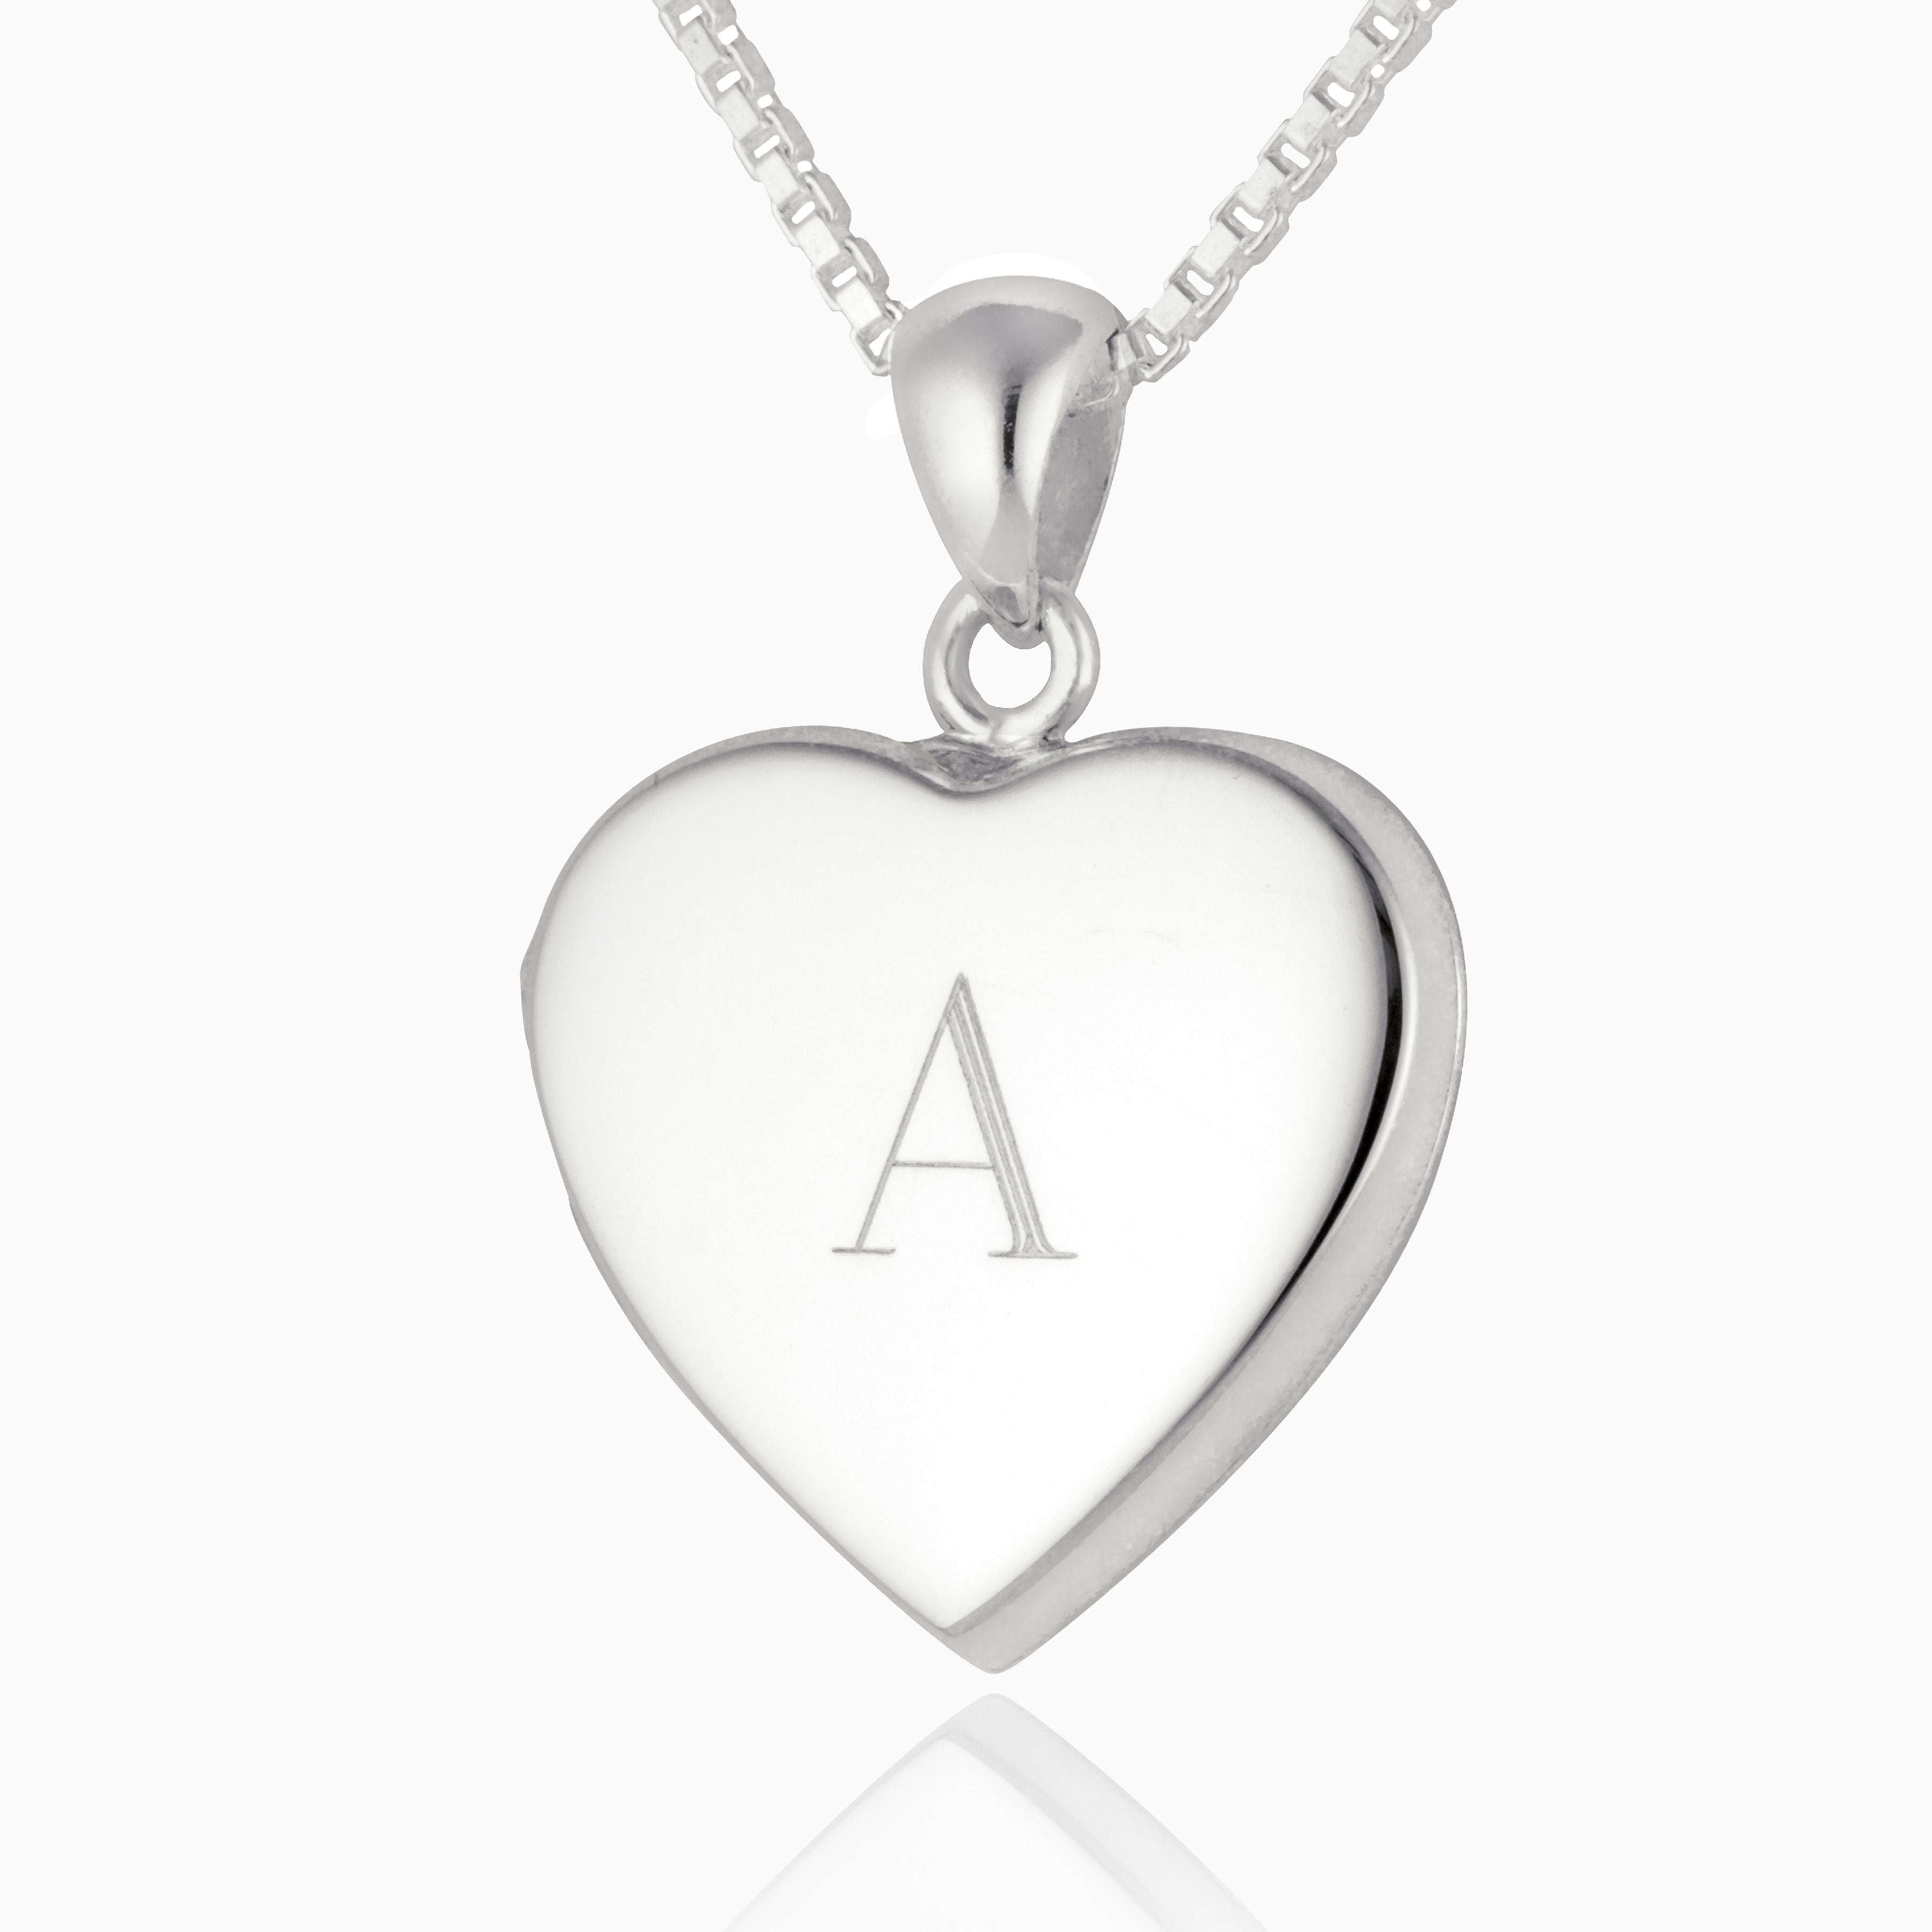 sterling silver heart locket with the initial A engraved on the front in a Roman font, on a sterling silver box chain